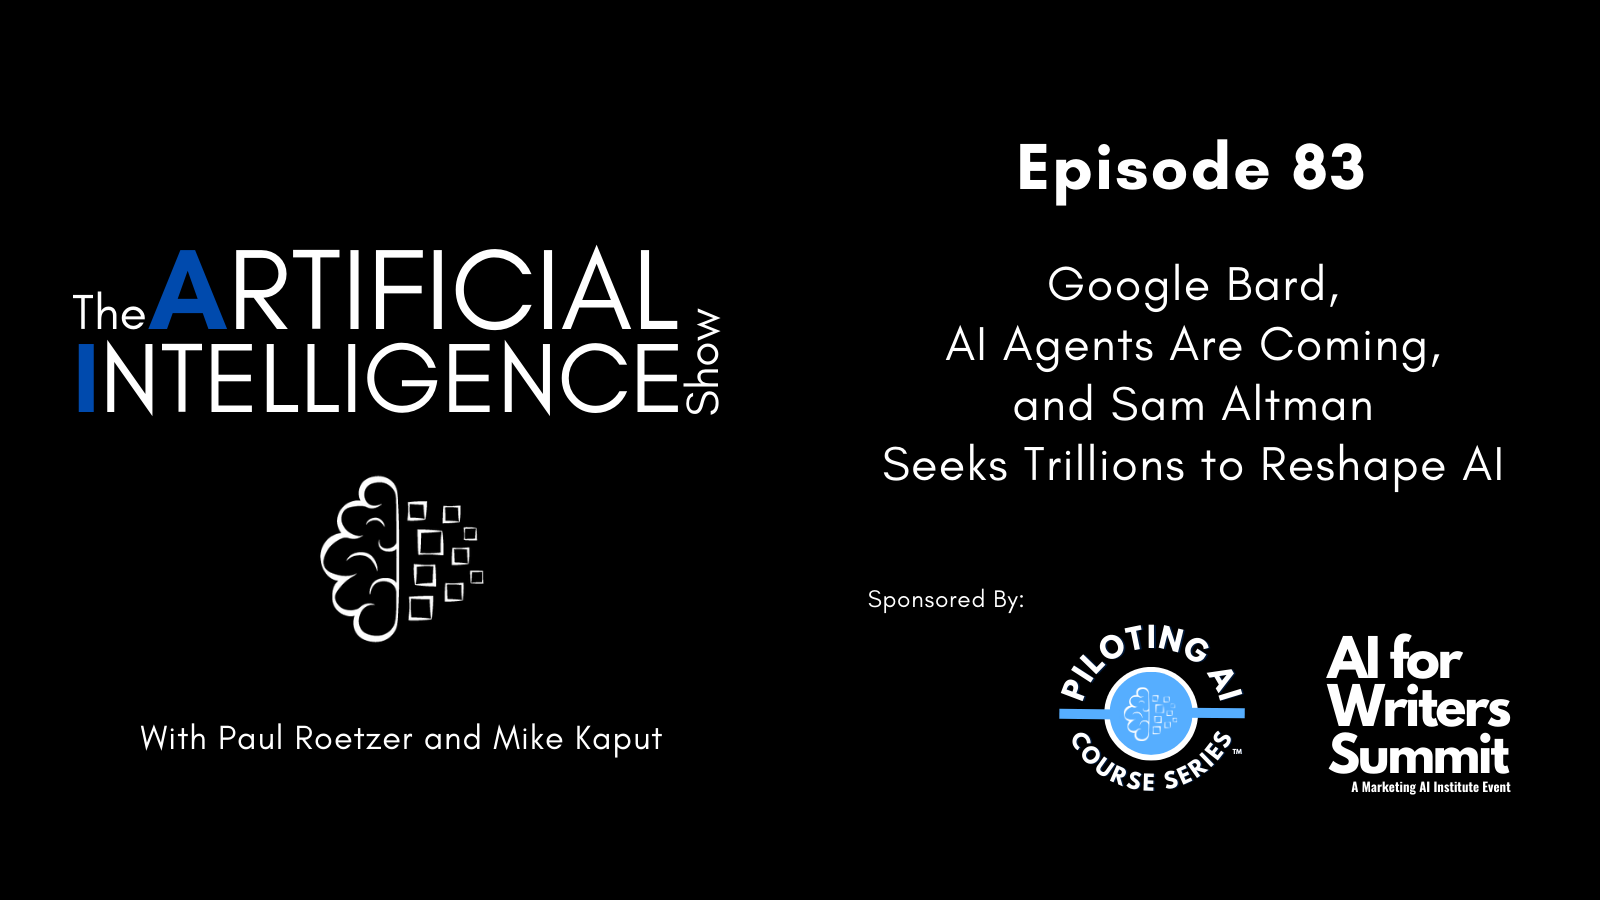 [The AI Show Episode 83]: Google Bard Is Now Gemini, AI Agents Are Coming, and Sam Altman Seeks Trillions to Reshape AI [Video]